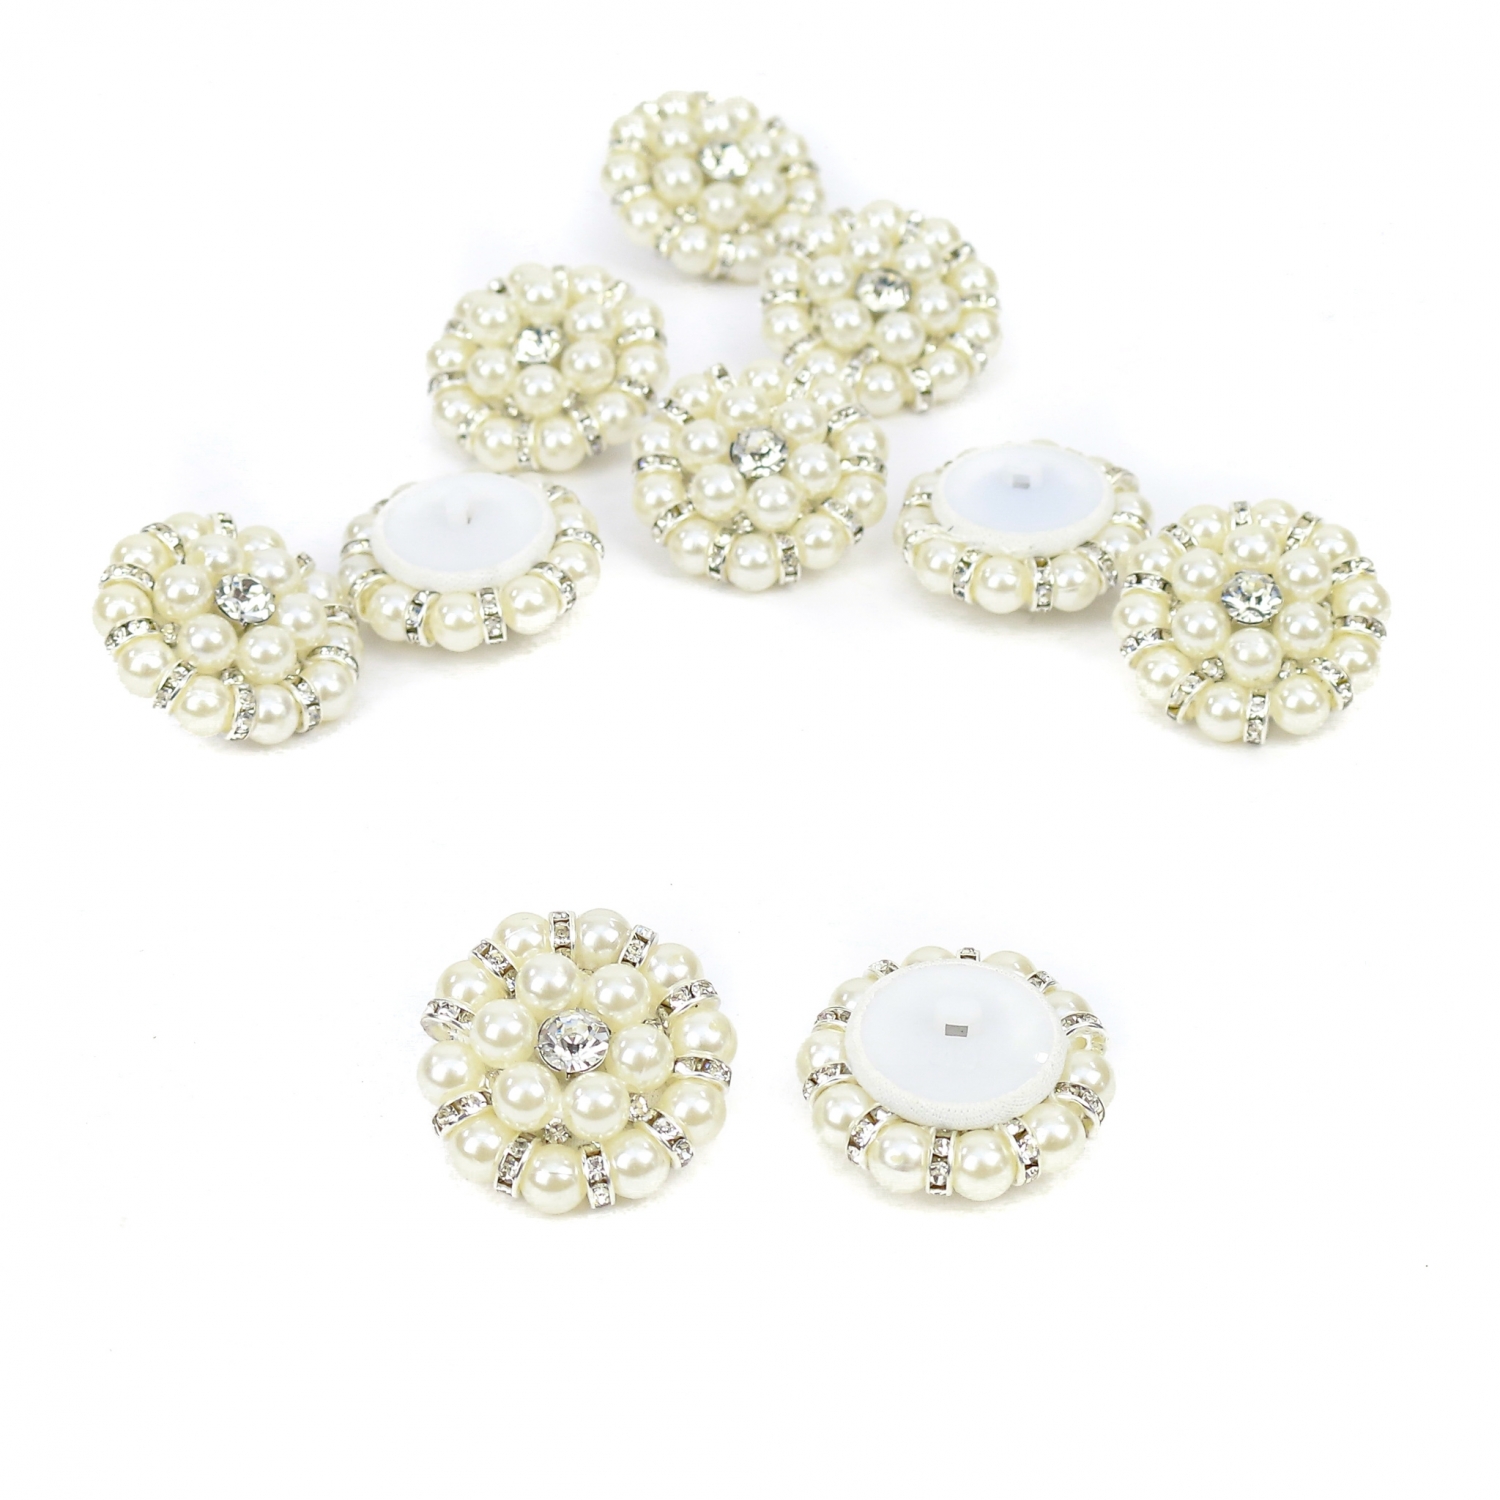 Shank Buttons with Pearls and Rhinestones, 35 mm (10 pcs/pack) Code: BT0725